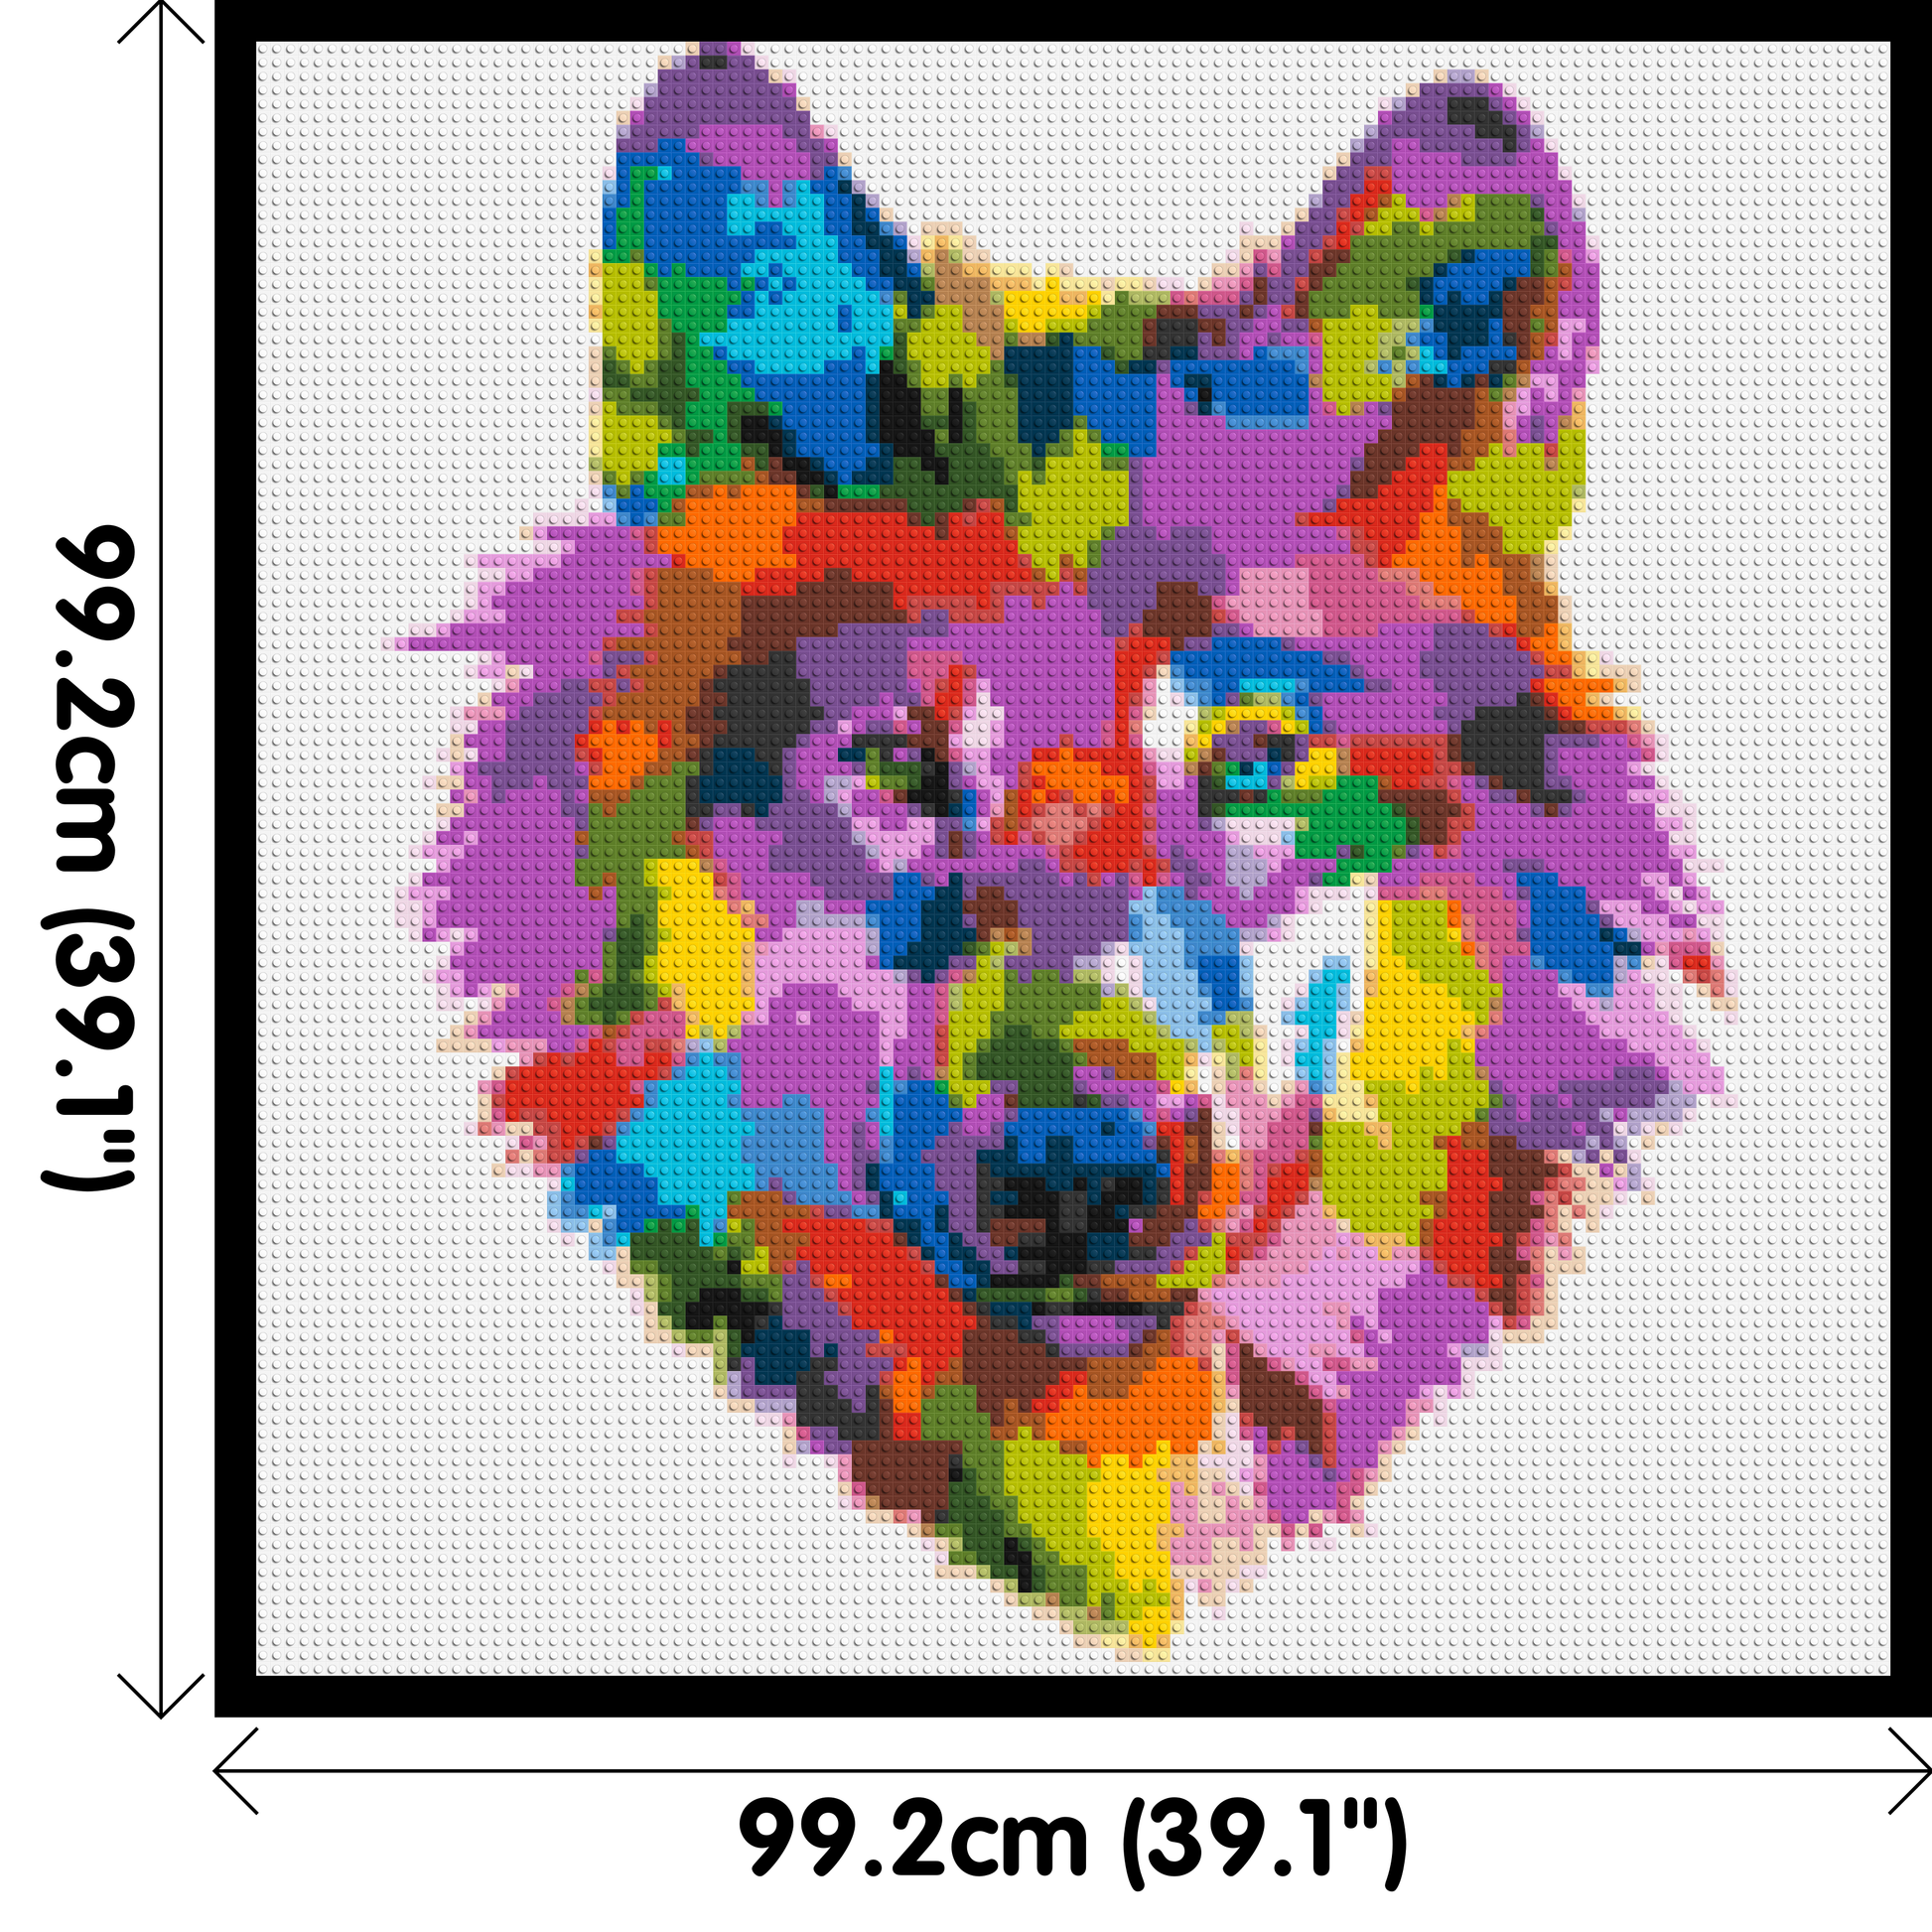 Wolf Colourful Pop Art - Brick Art Mosaic Kit 5x5 dimensions with frame